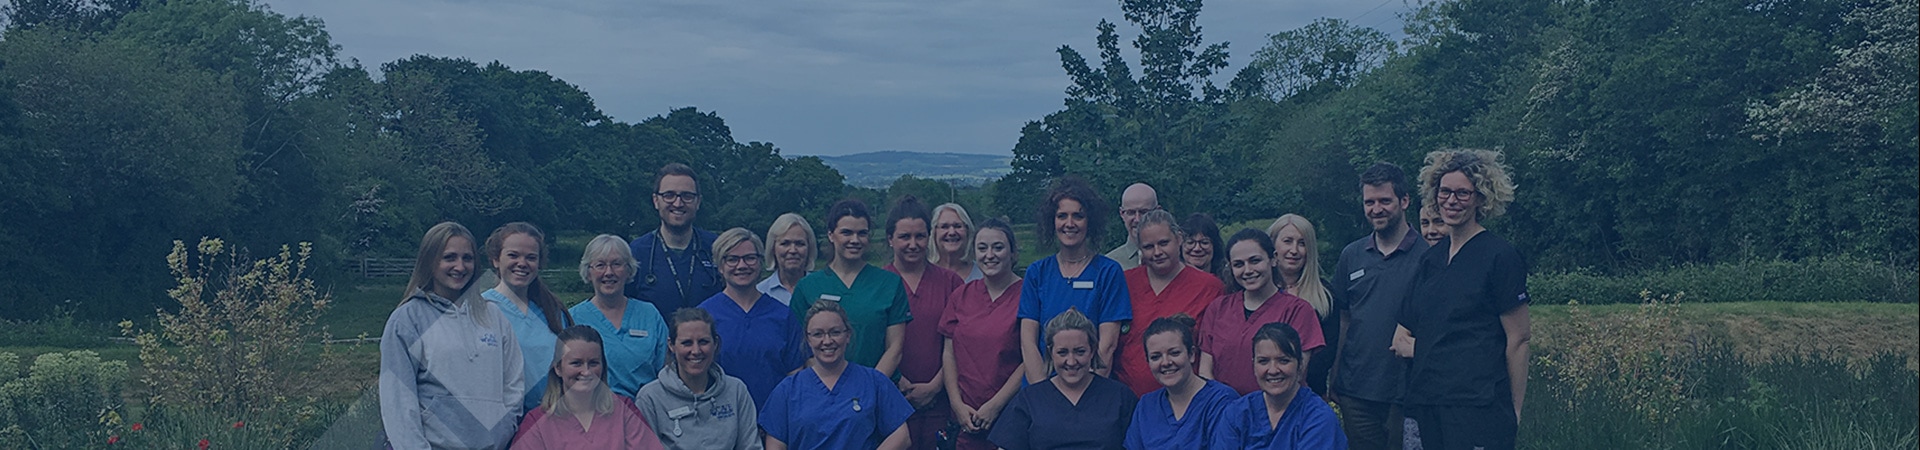 Cardiology Team | Cave Veterinary Specialists